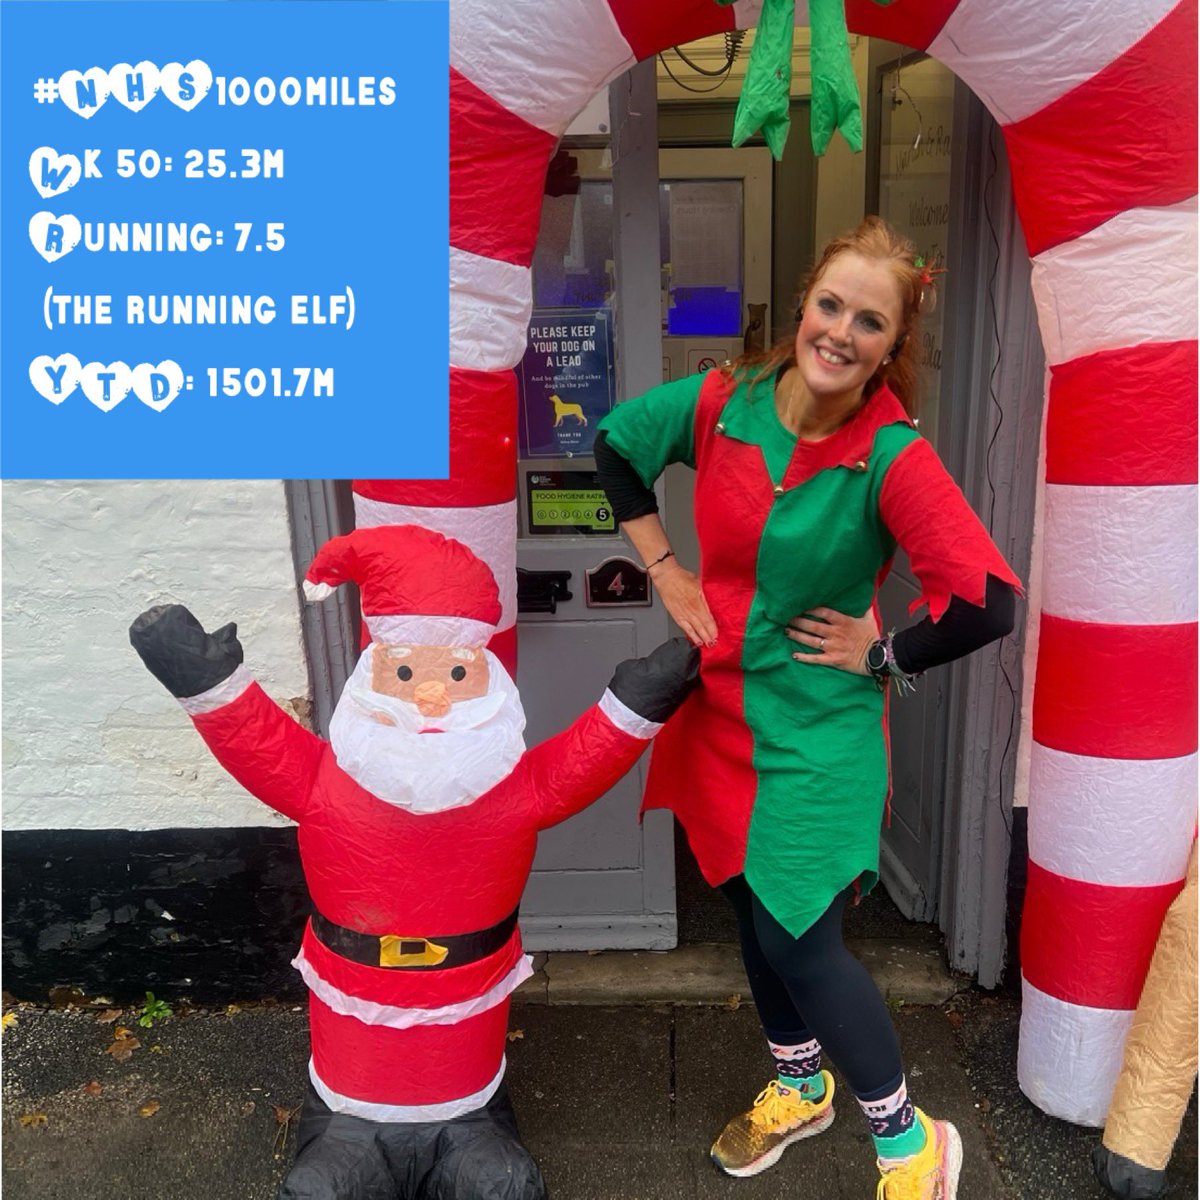 A busy, busy week but managed some walking & 7.5 running miles- surely there has to be a bonus for those being run in an elf costume (hasten to add as part of a charity relay!) National Elf Service 1000 miles at its best ?!! #nhs1000miles #nhs75